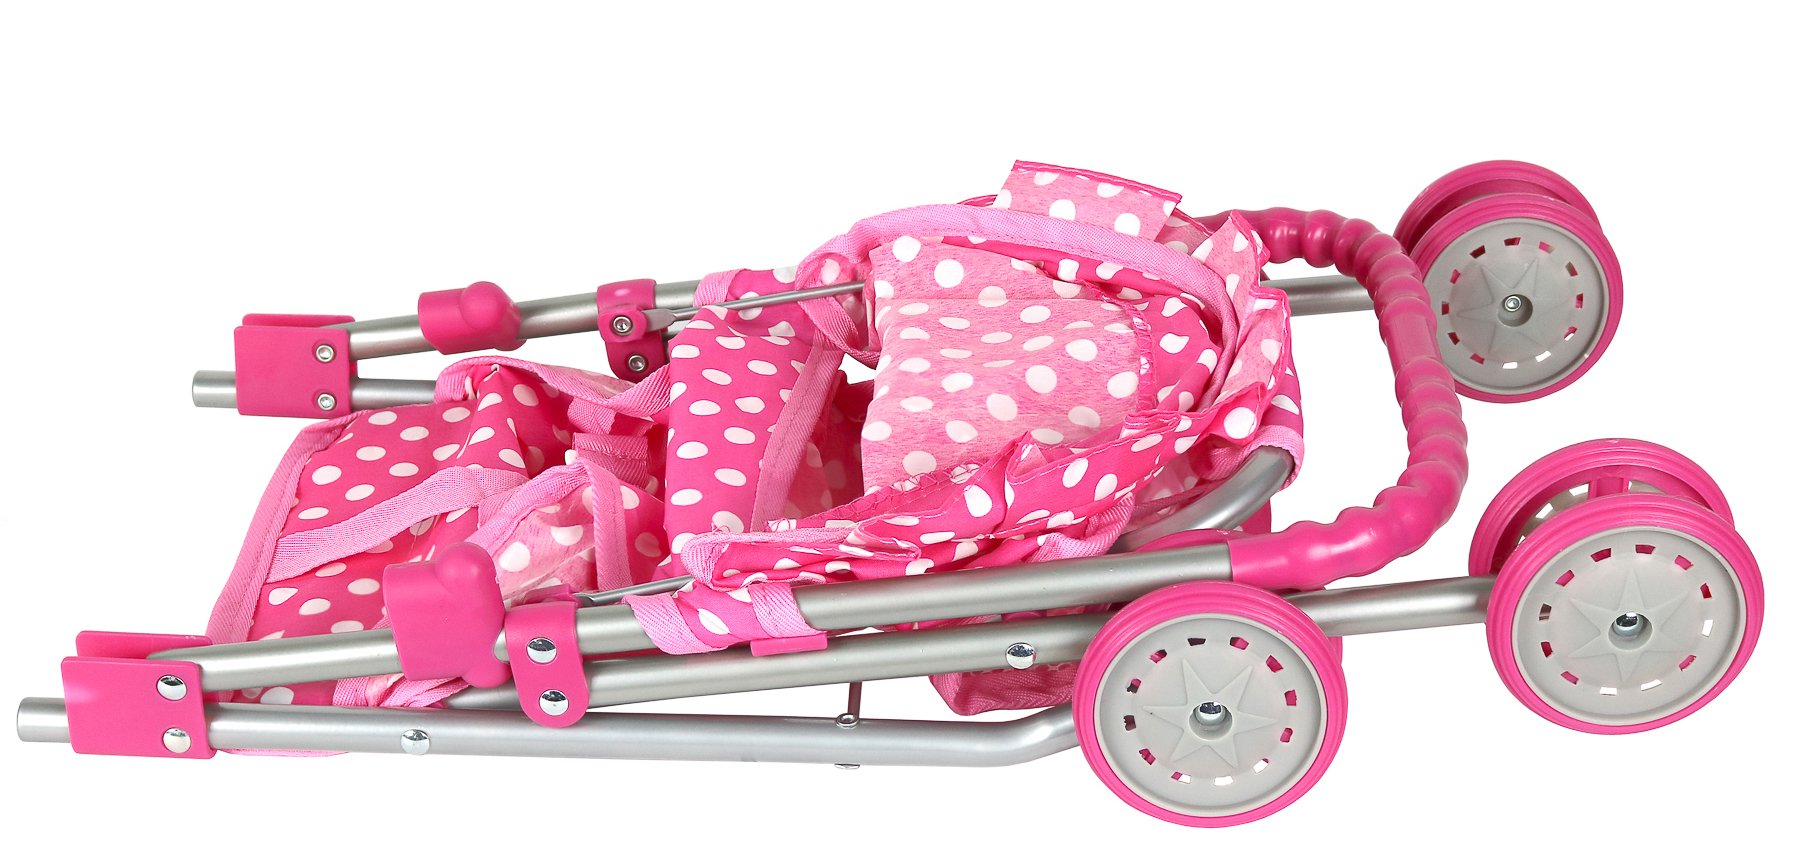 Precious Toys Baby Doll Stroller, Pink & White Polka Dots Baby Stroller for Dolls, Foldable with Hood and Basket, Toy Stroller for Baby Dolls, Doll Strollers for Girls 2 Years Old and Older, Toddlers